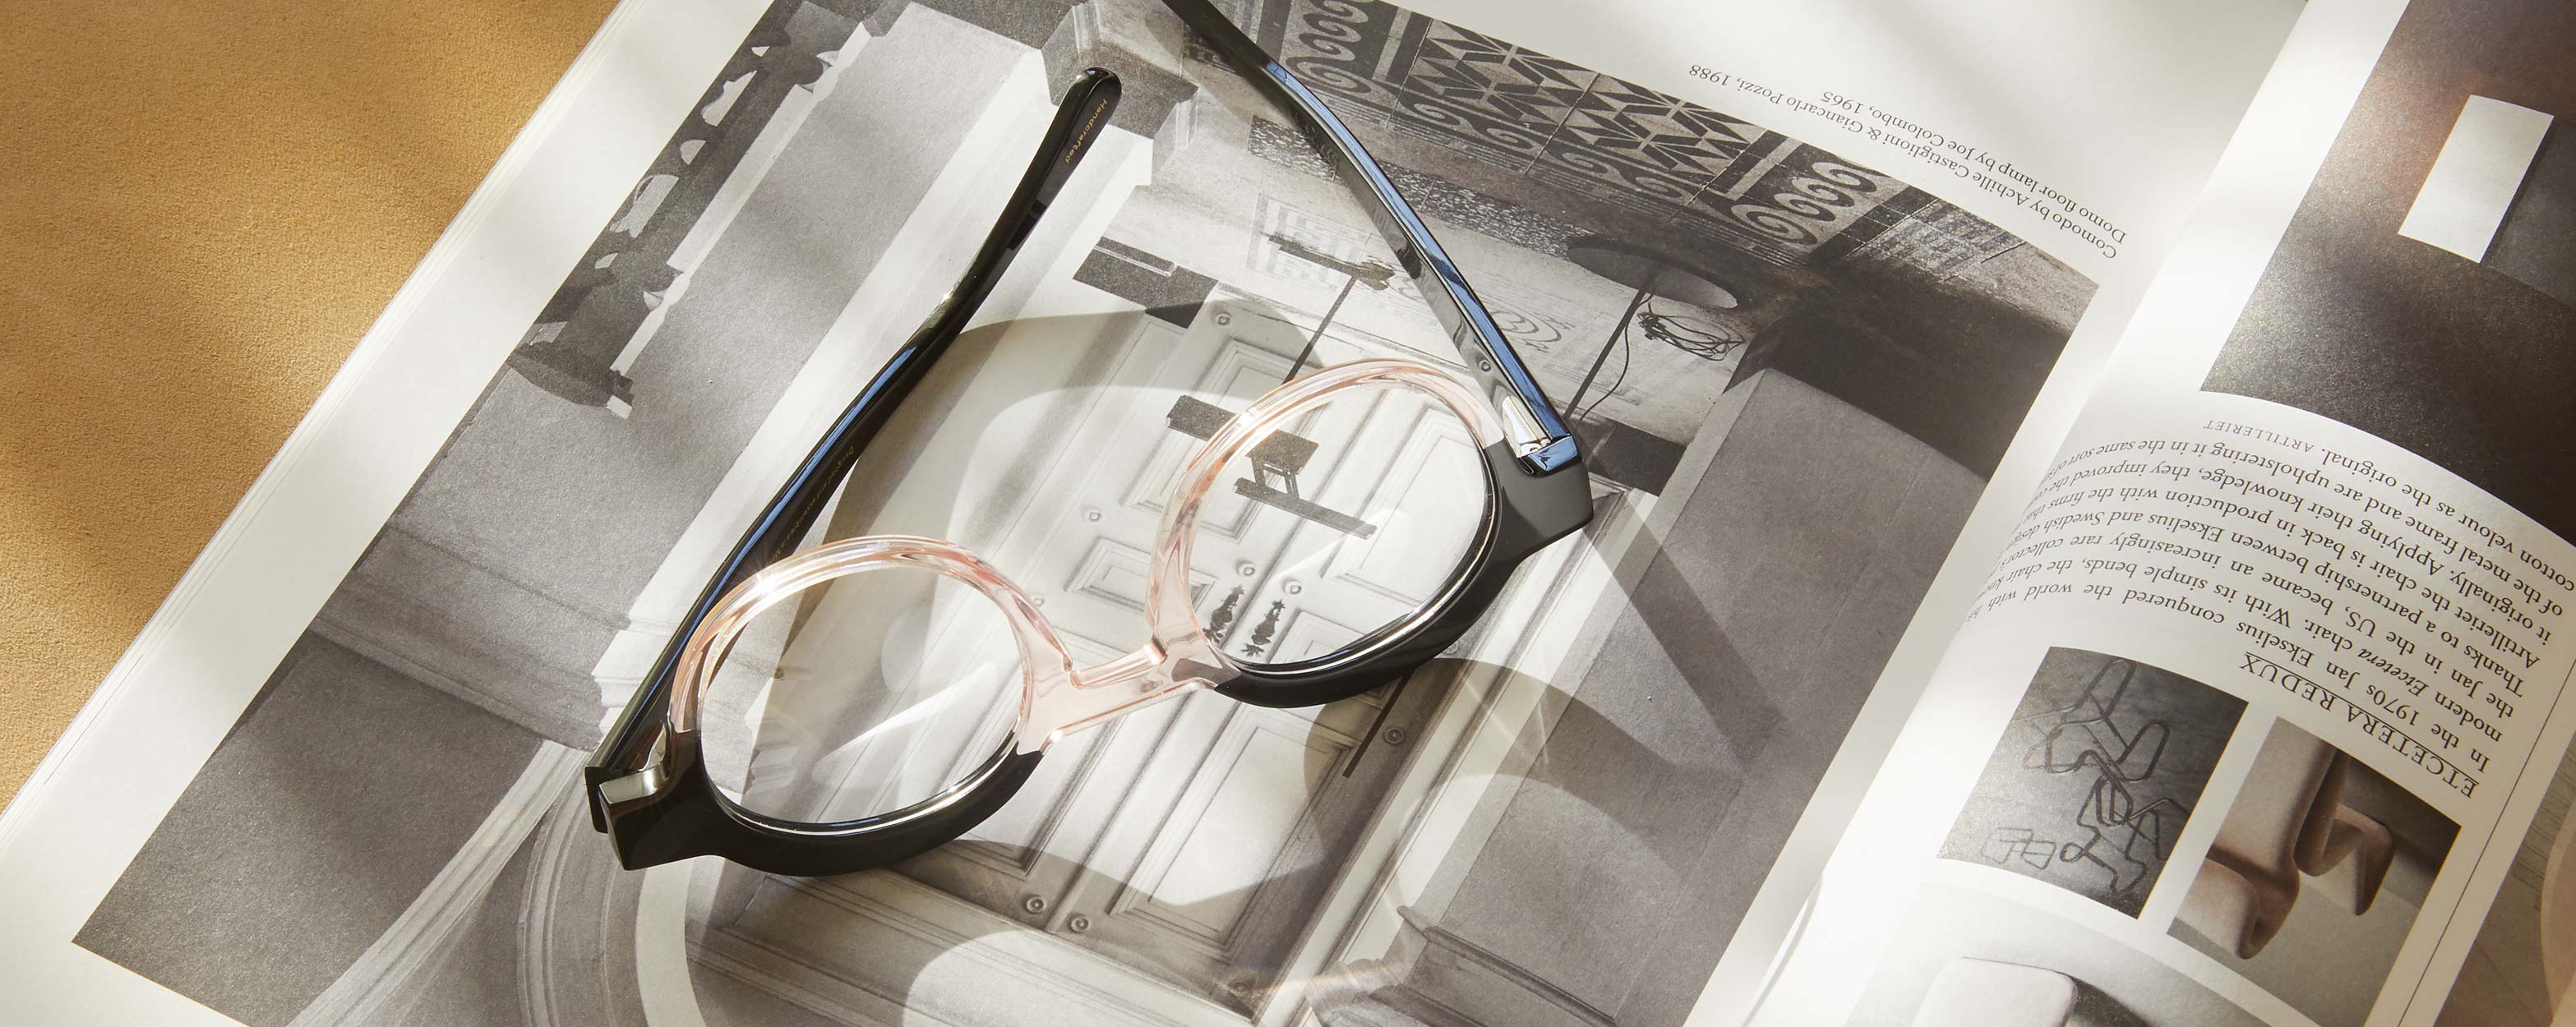 Photo Details of Charlotte Black & Clear Pink Reading Glasses in a room